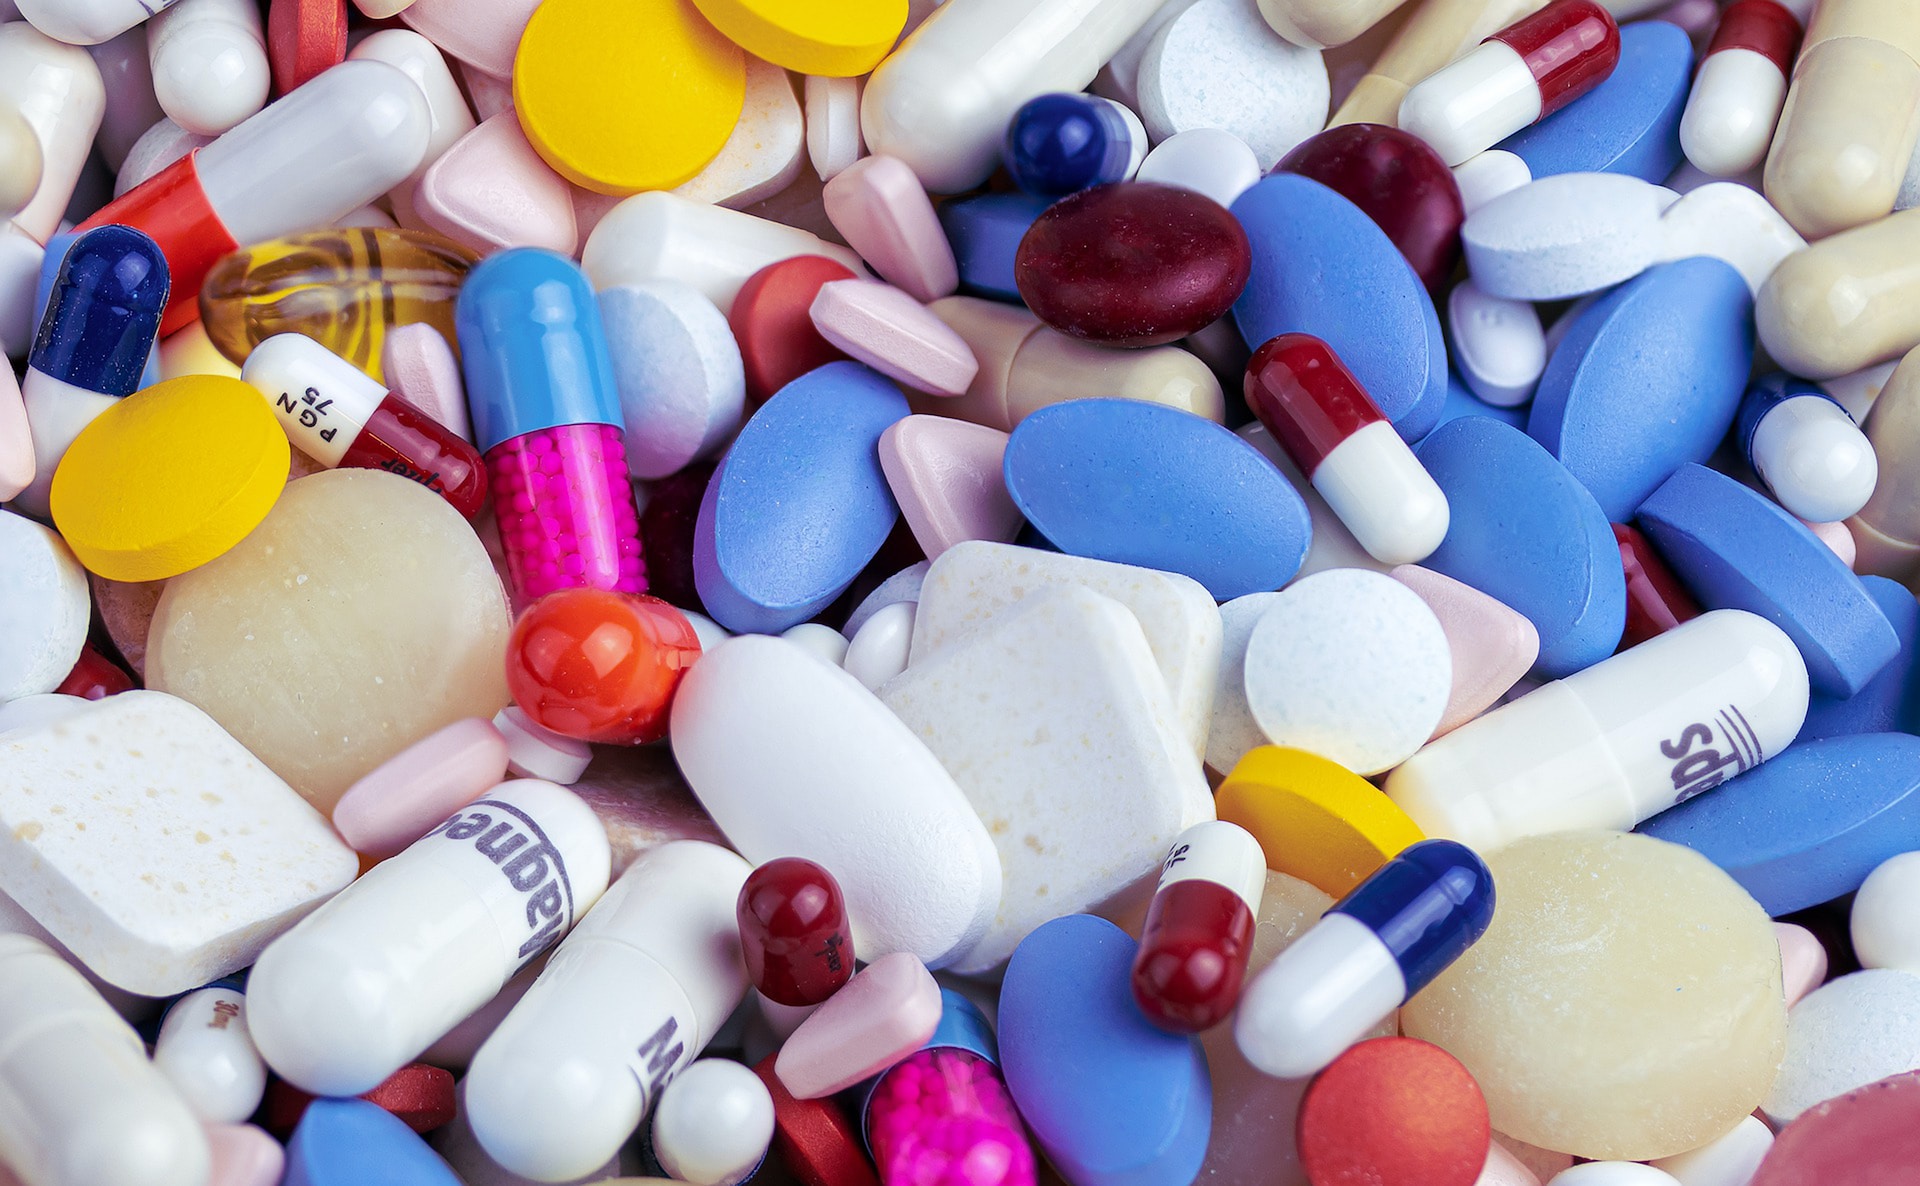 Colourful photo of many pills and tablets